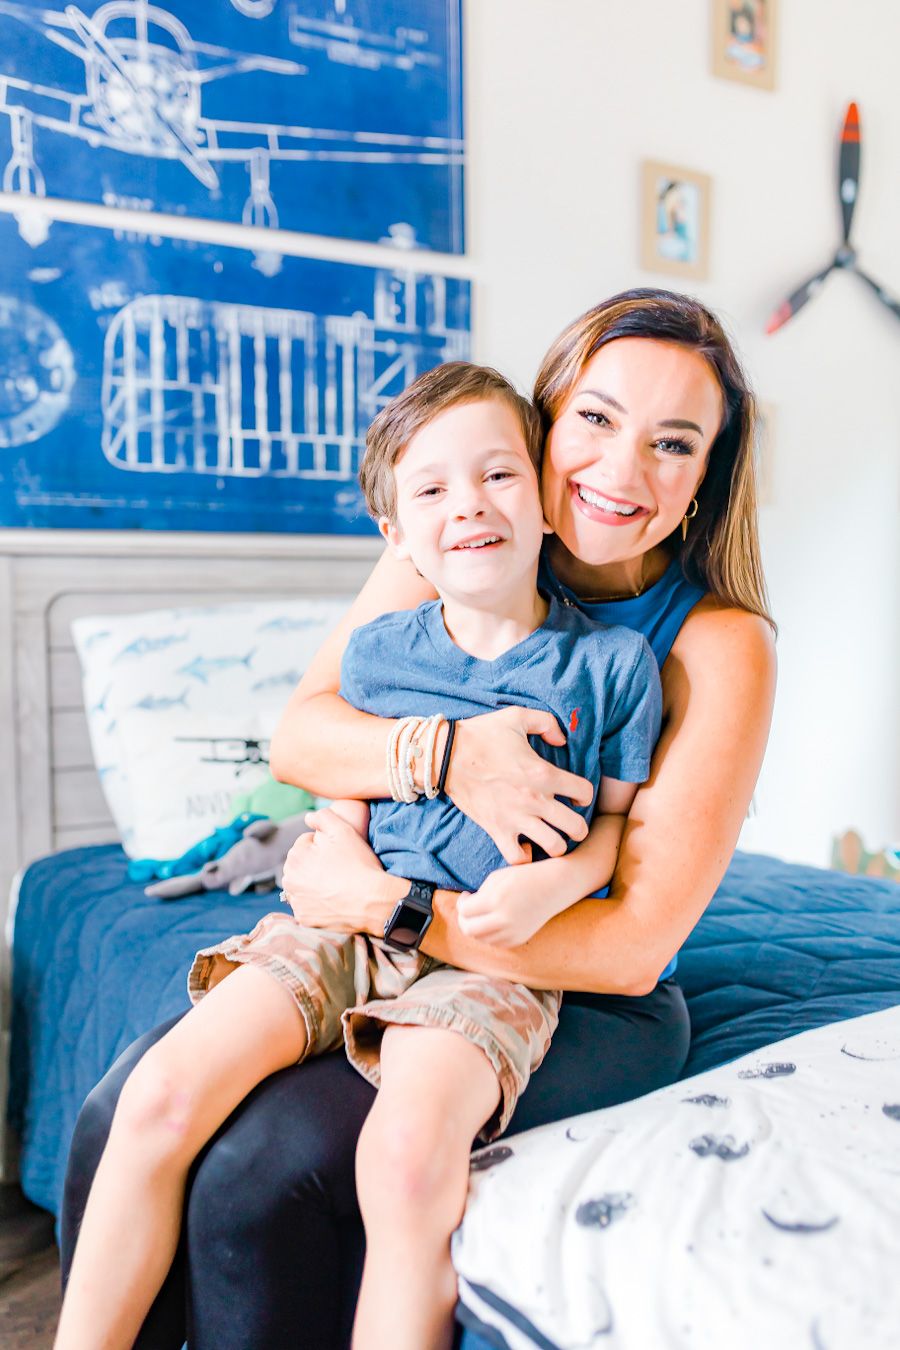 Alabama mom + lifestyle blogger, My Life Well Loved, shares her back to school morning routine + tips for meal planning. Click here to read!